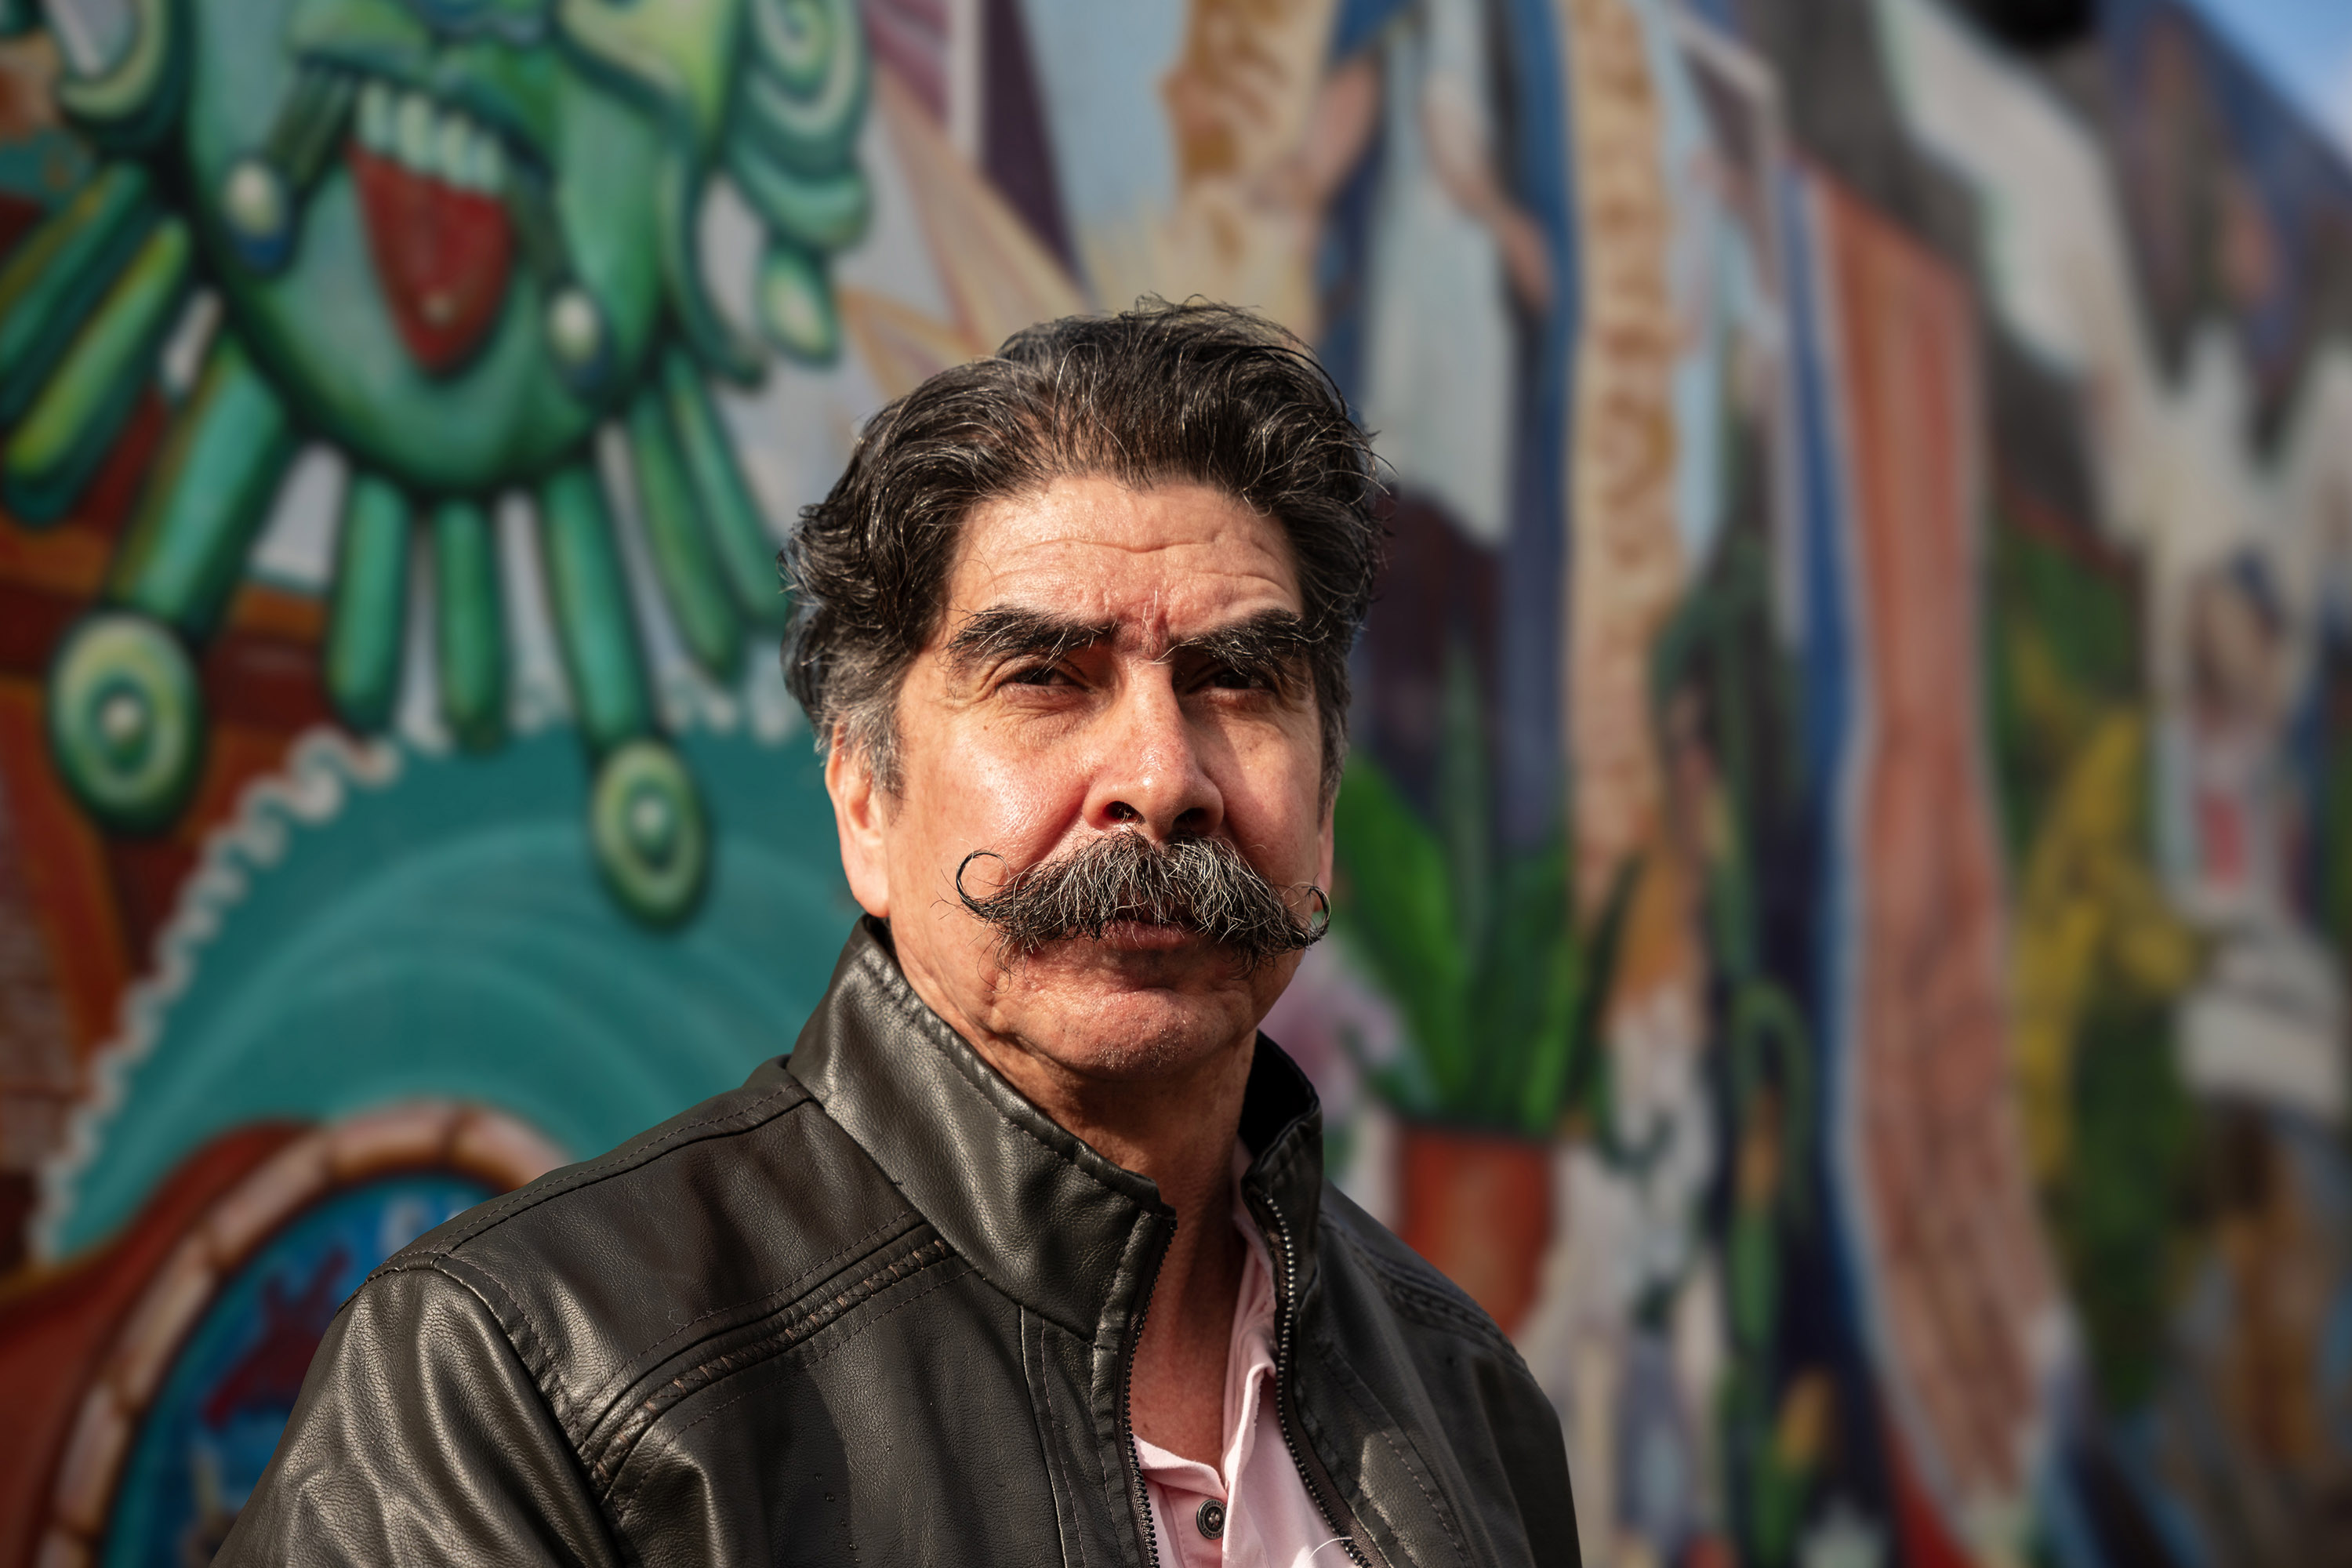 A portrait of Antonio Abundis. He stands in front of a colorful mural on a sunny day.